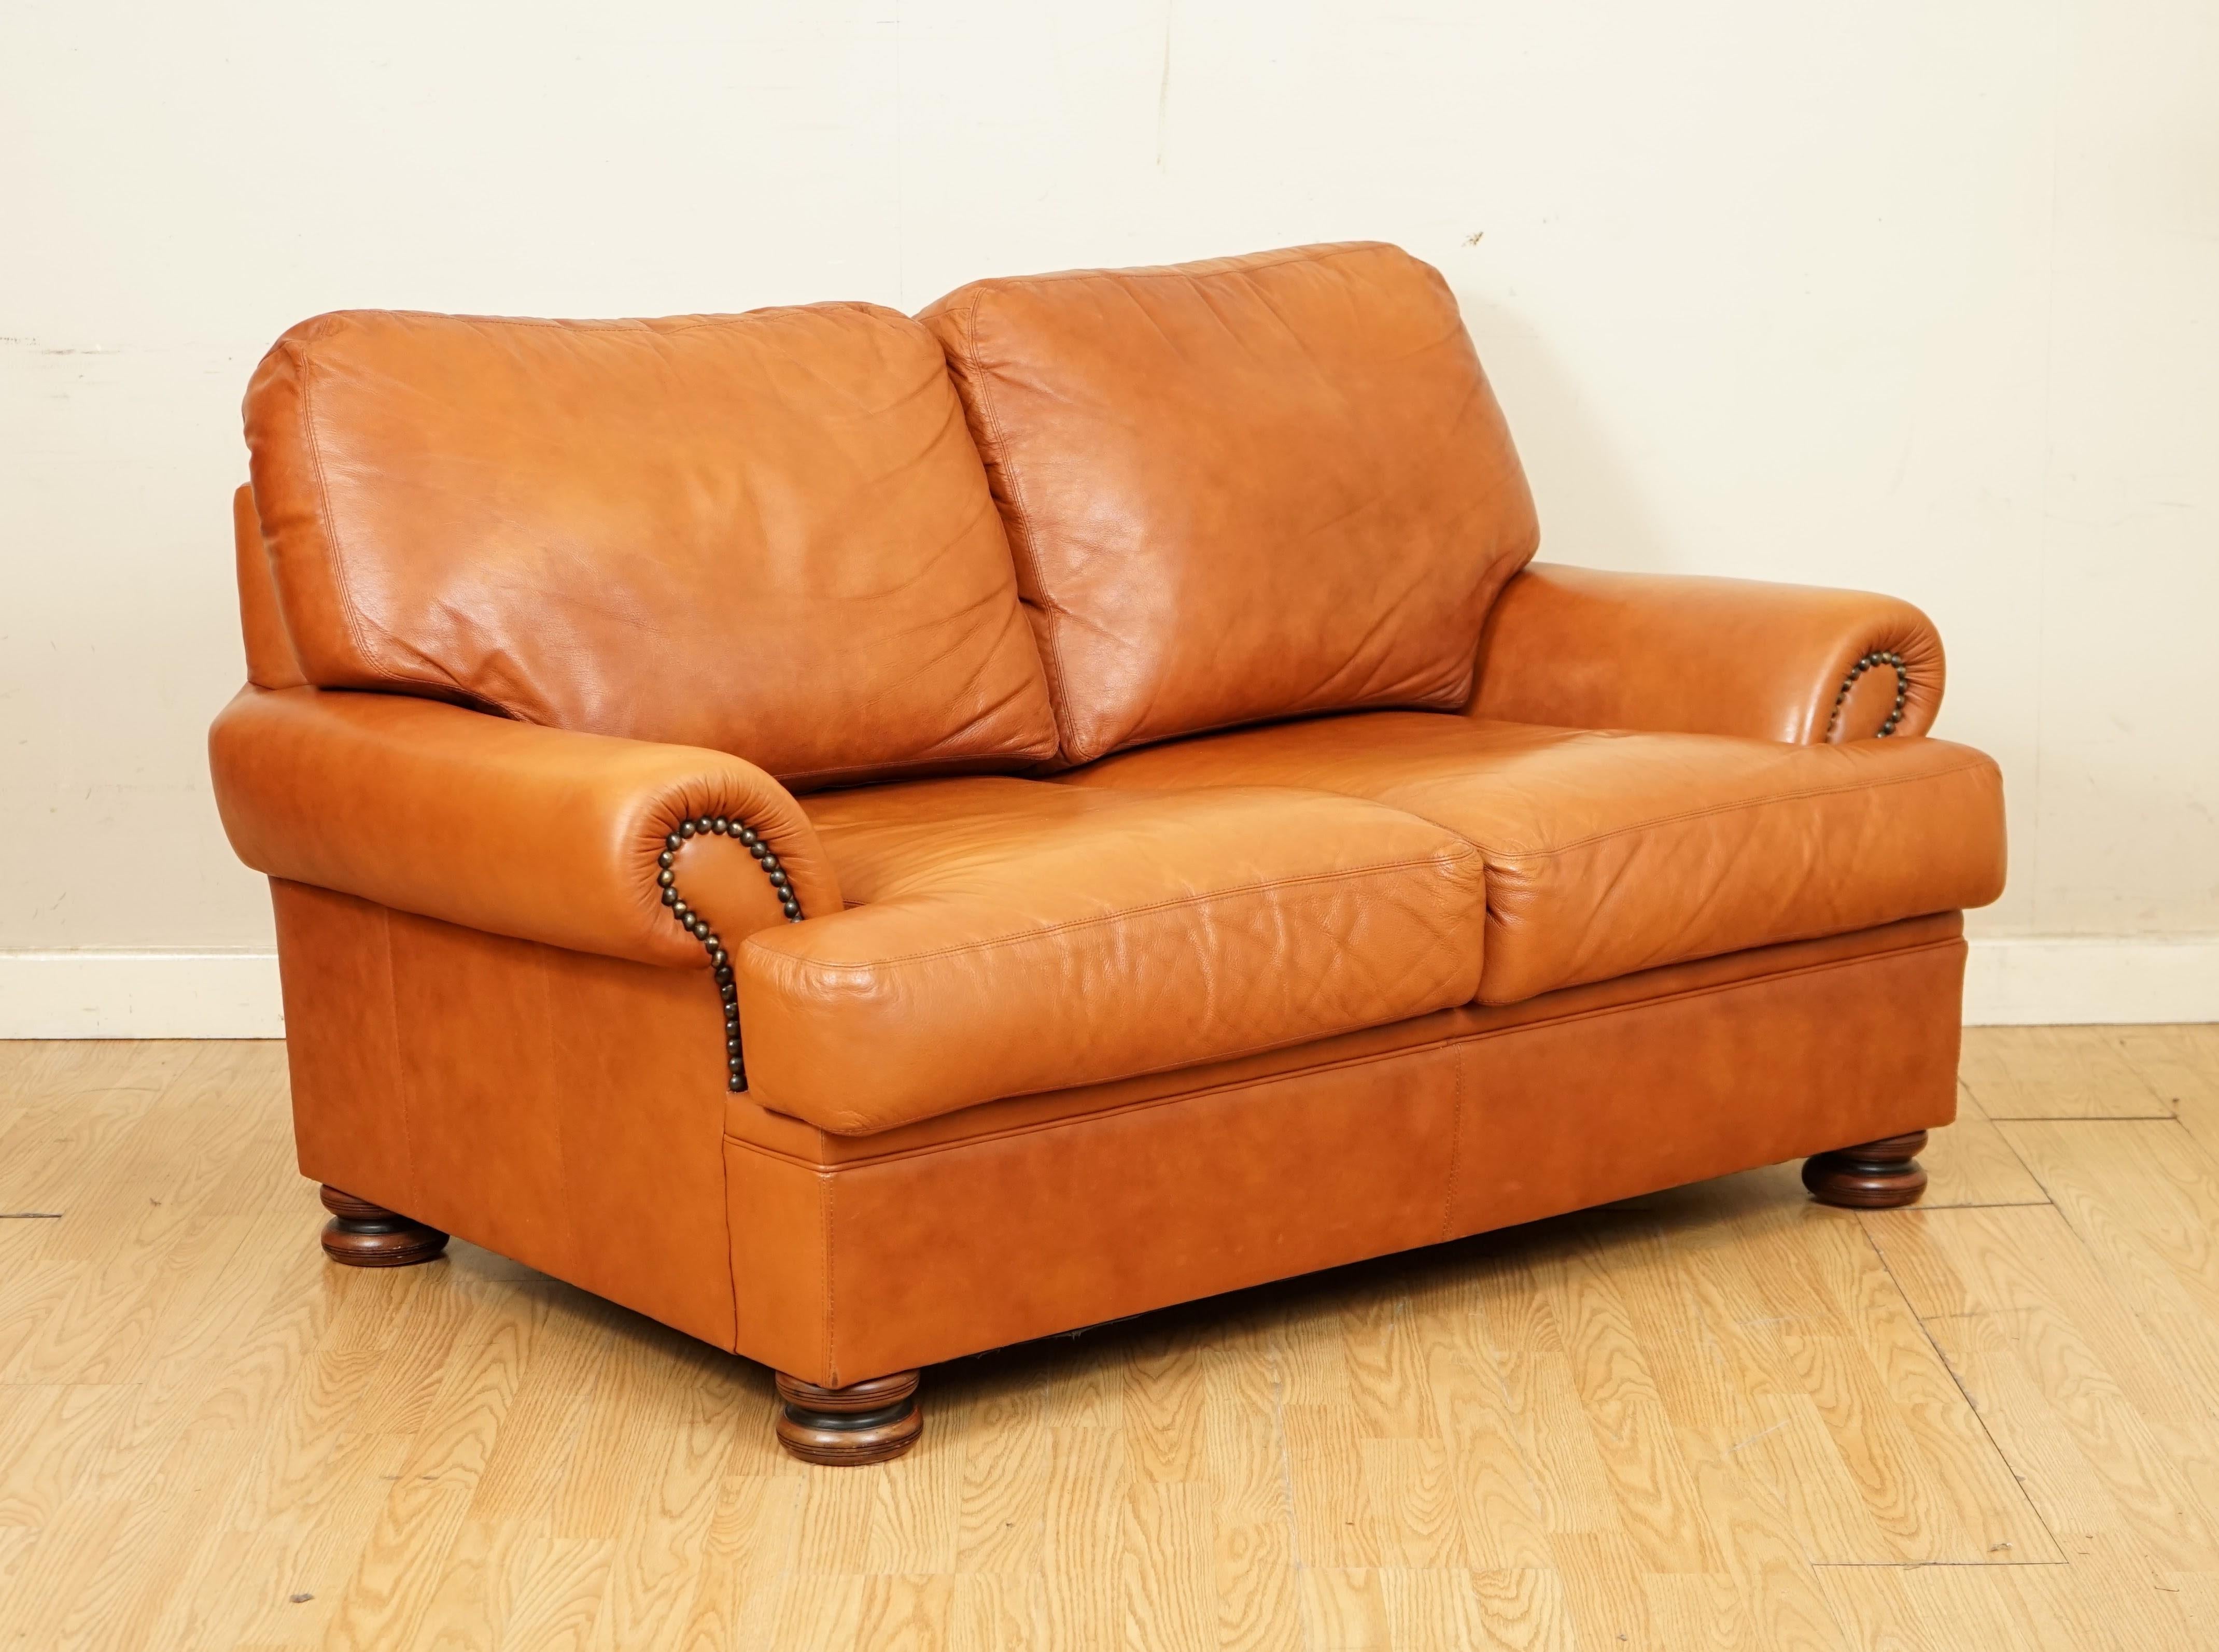 We are so excited to present to you this Tetrad Cordoba two seater leather sofa.

A very solid, well made and compact sofa that fits anywhere you want in your home.

We have lightly restored this by giving it a hand clean all over, hand waxed